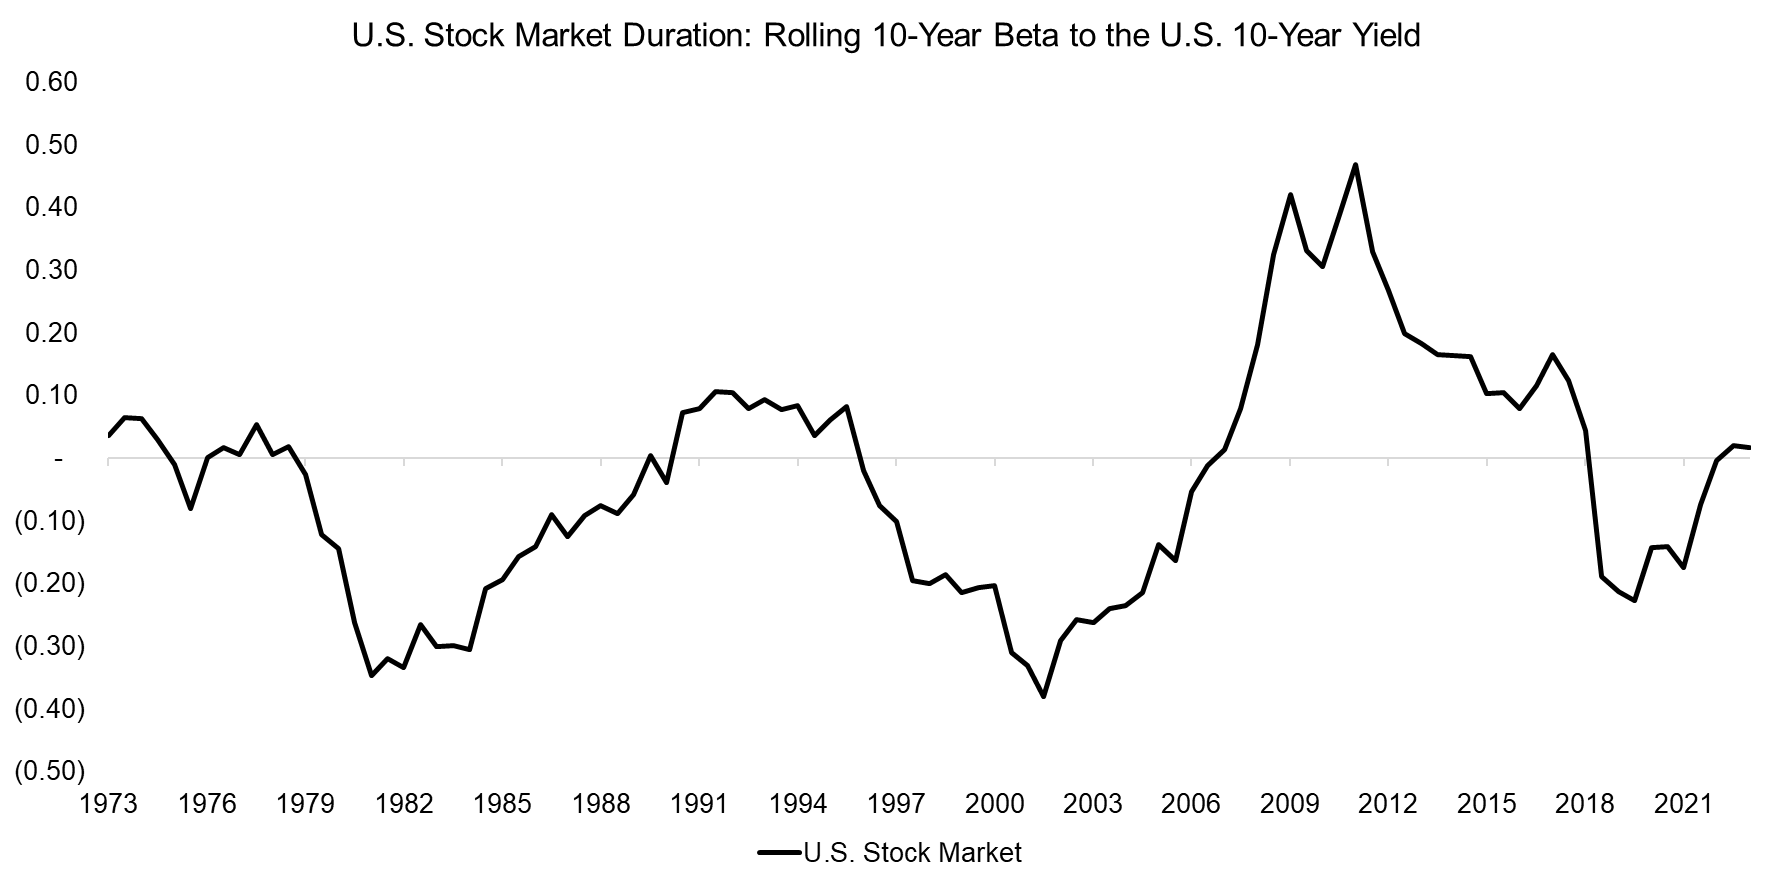 U.S. Stock Market Duration Rolling 10-Year Beta to the U.S. 10-Year Yield